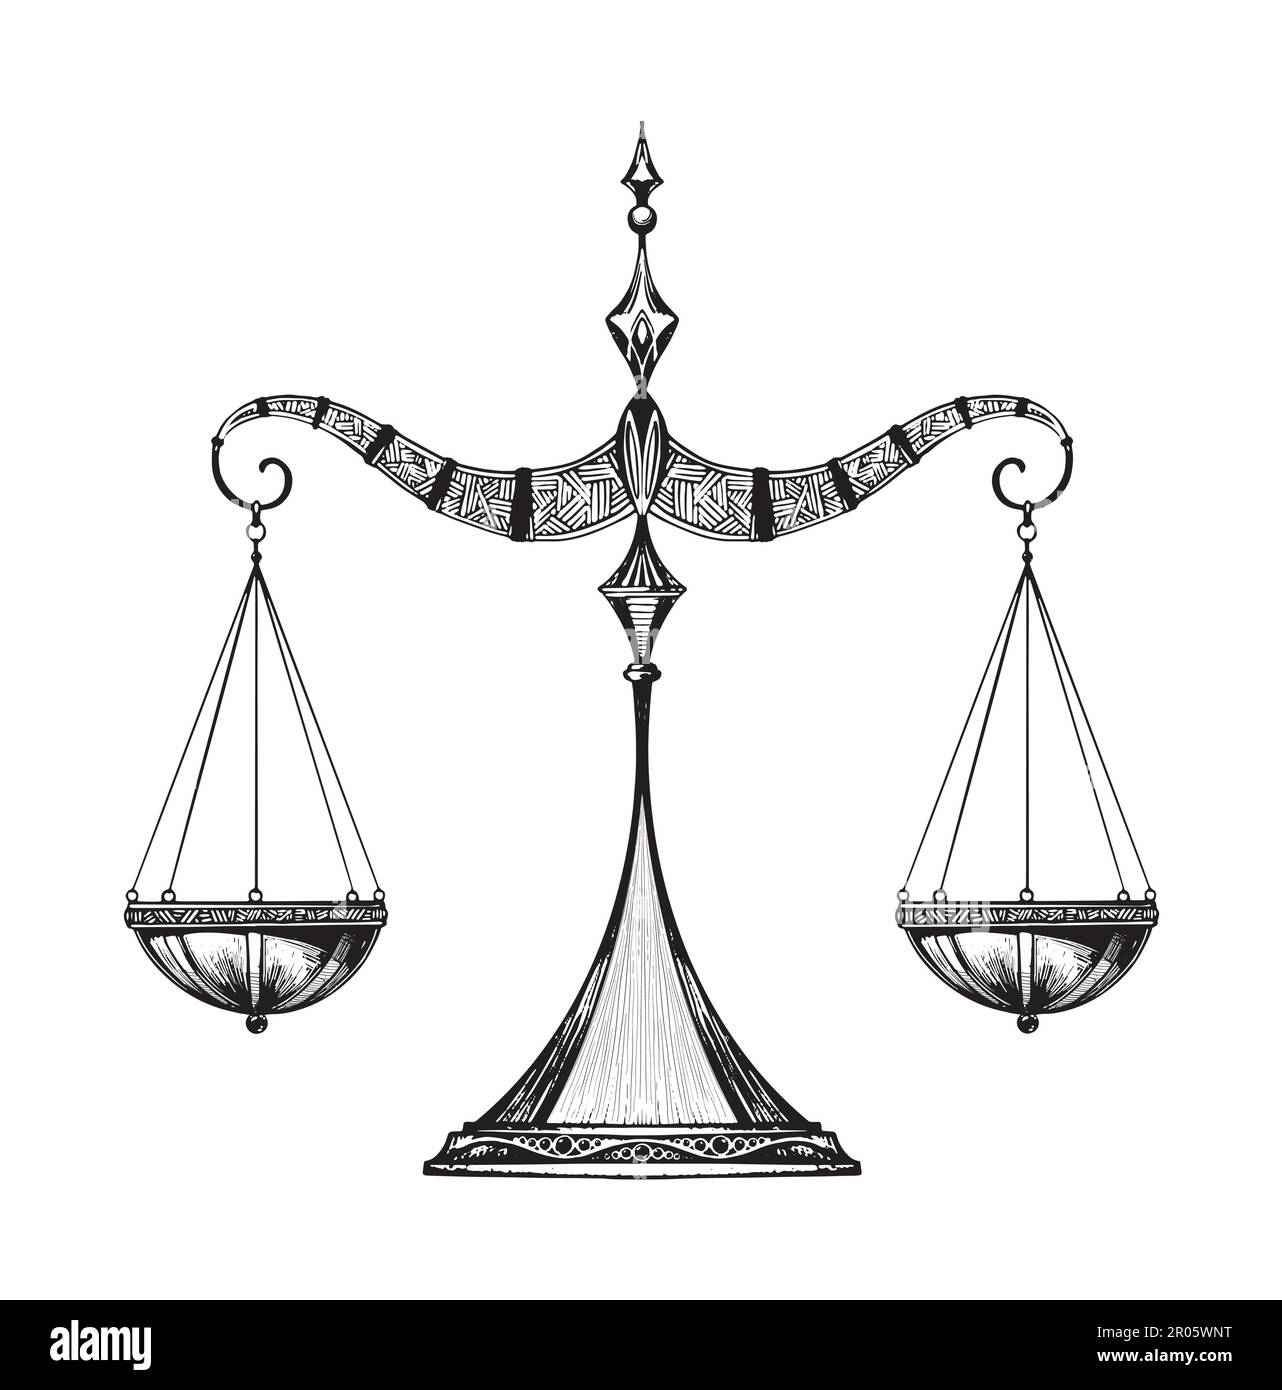 kids drawing Vector illustration Justice scales, Weight balance